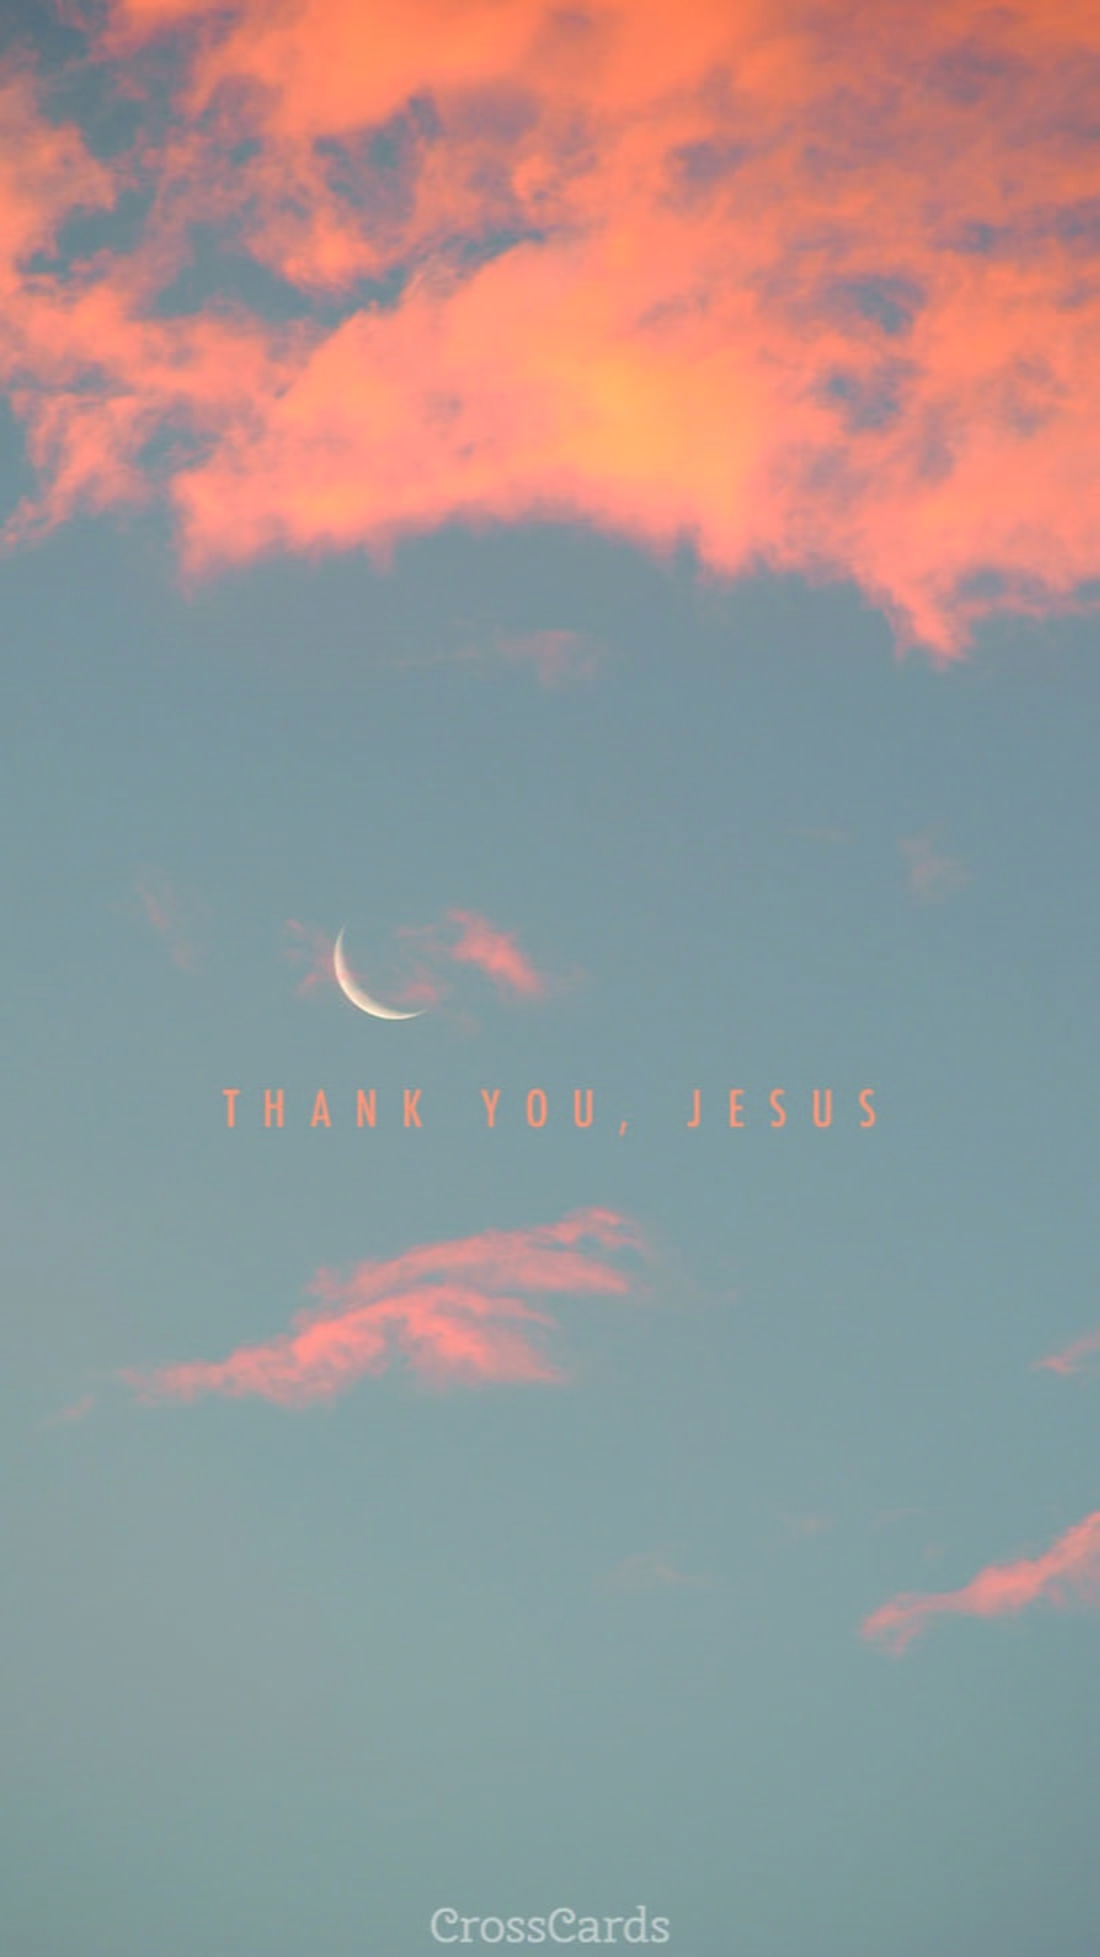 Thank You, Jesus - Phone Wallpaper and Mobile Background